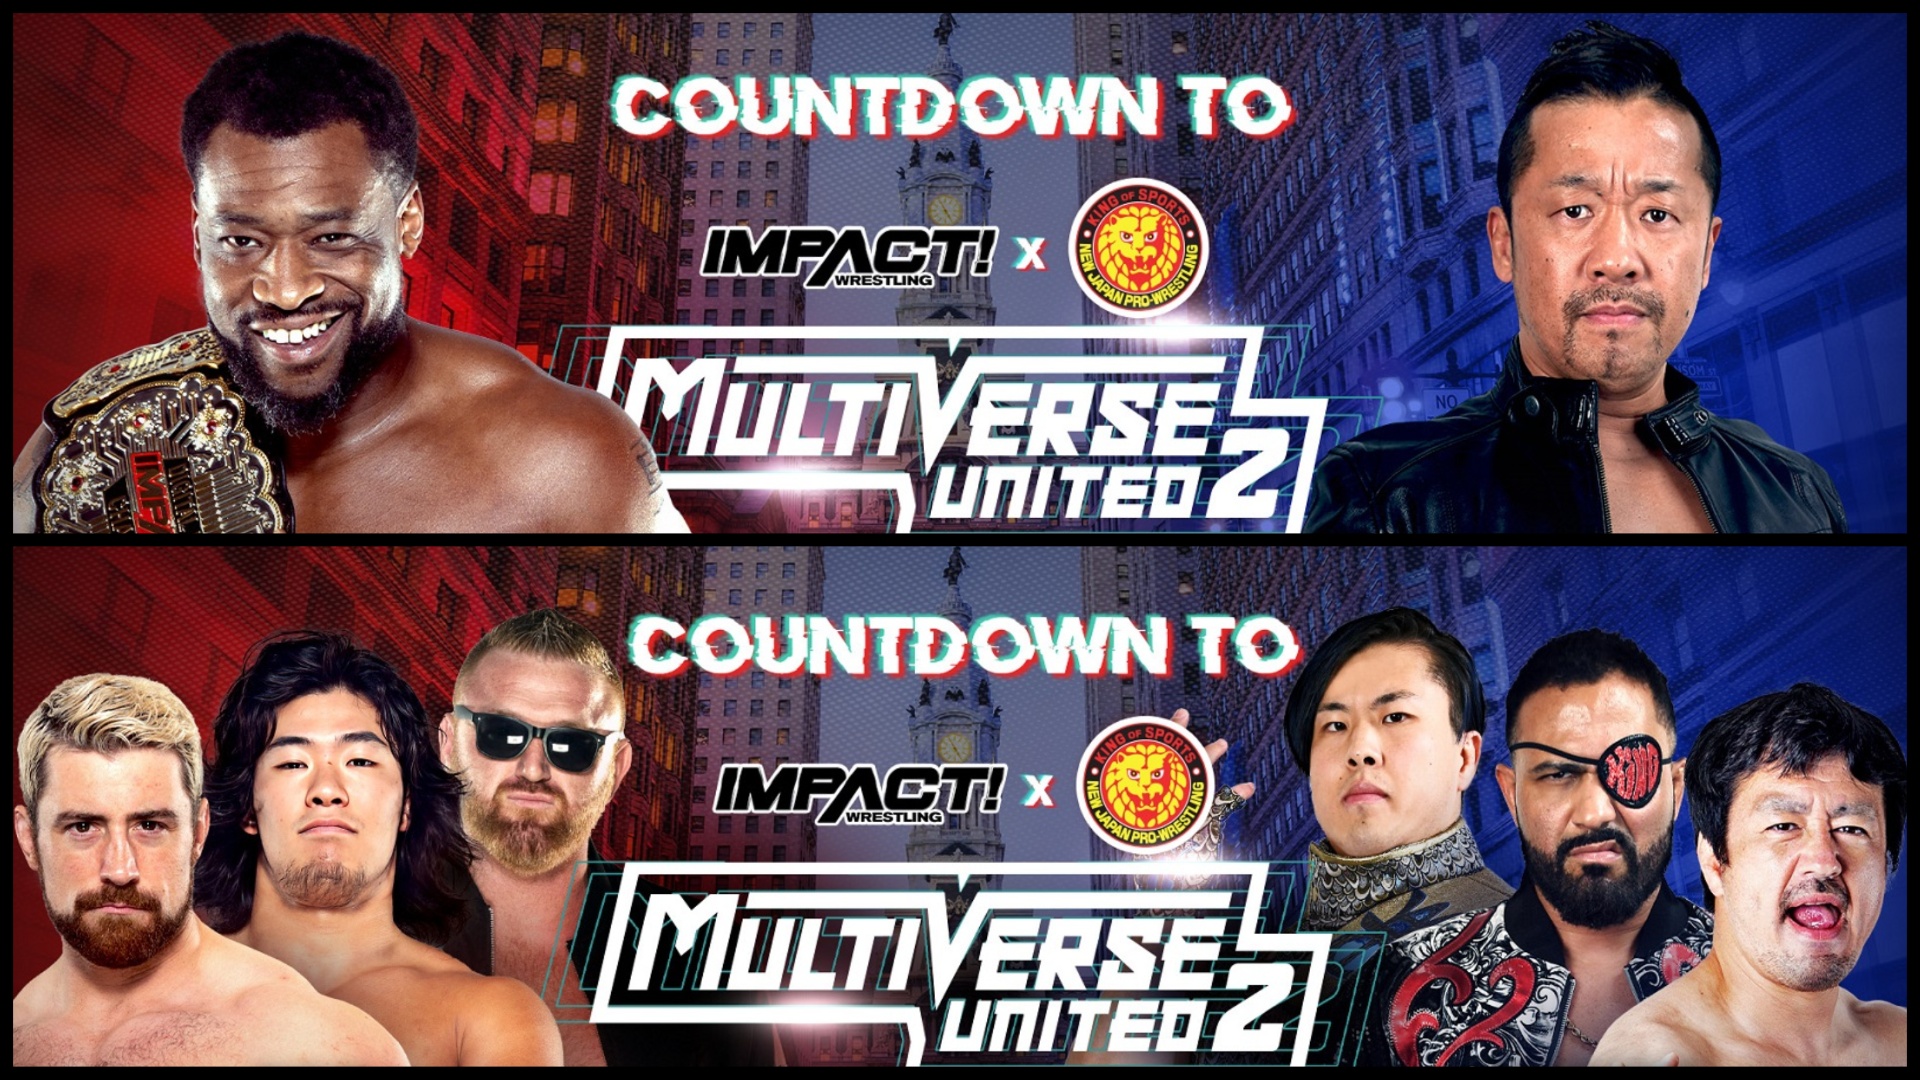 Digital Media Championship & 6-Man Tag Team Action LIVE & FREE on Countdown to Multiverse United 2 – IMPACT Wrestling